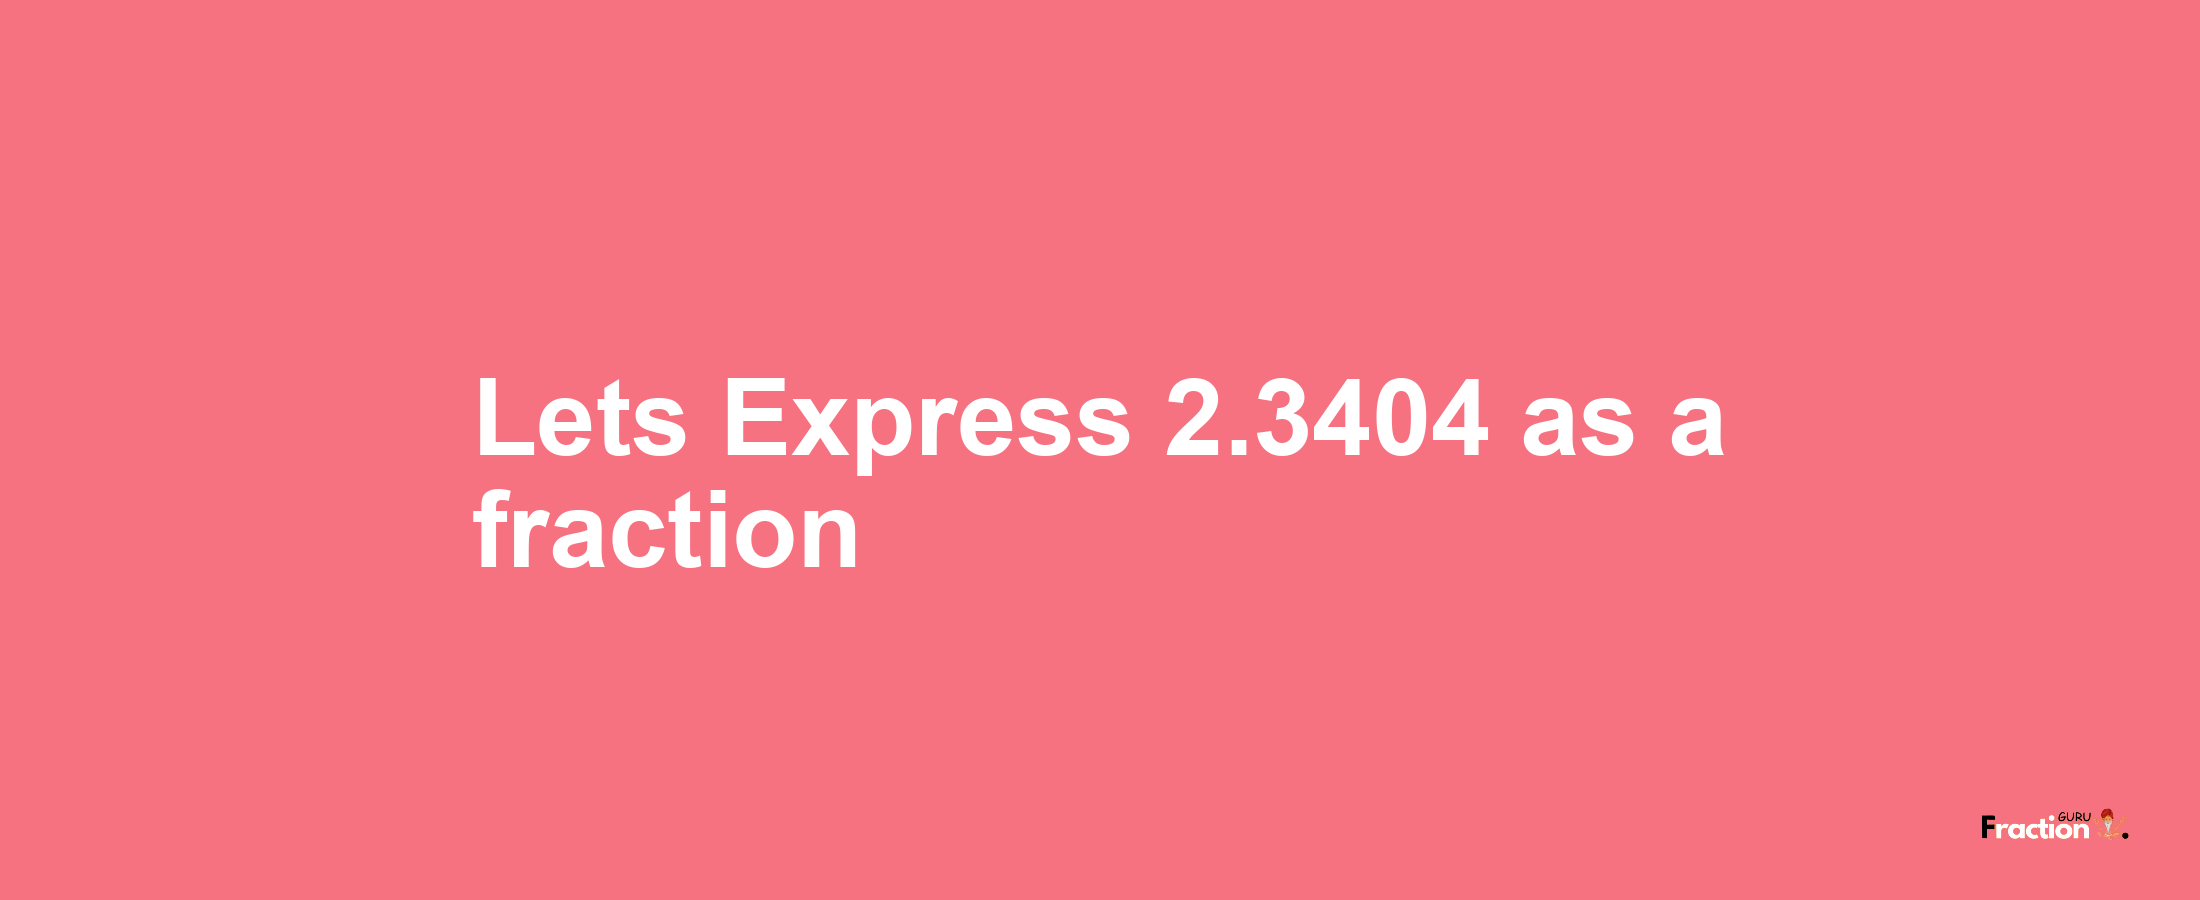 Lets Express 2.3404 as afraction